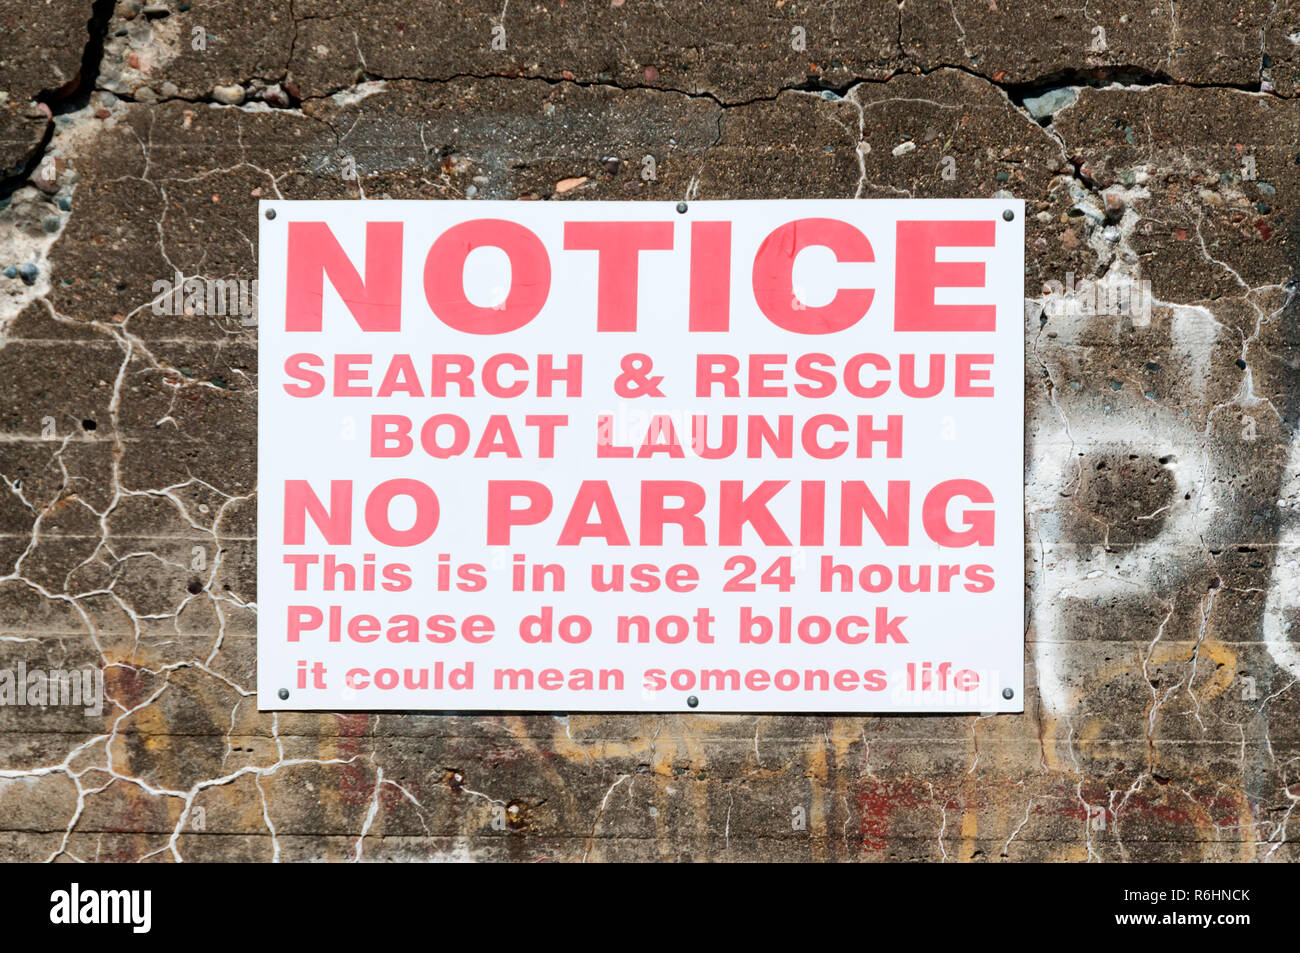 No Parking sign at Search & Rescue Boat Launch. Stock Photo